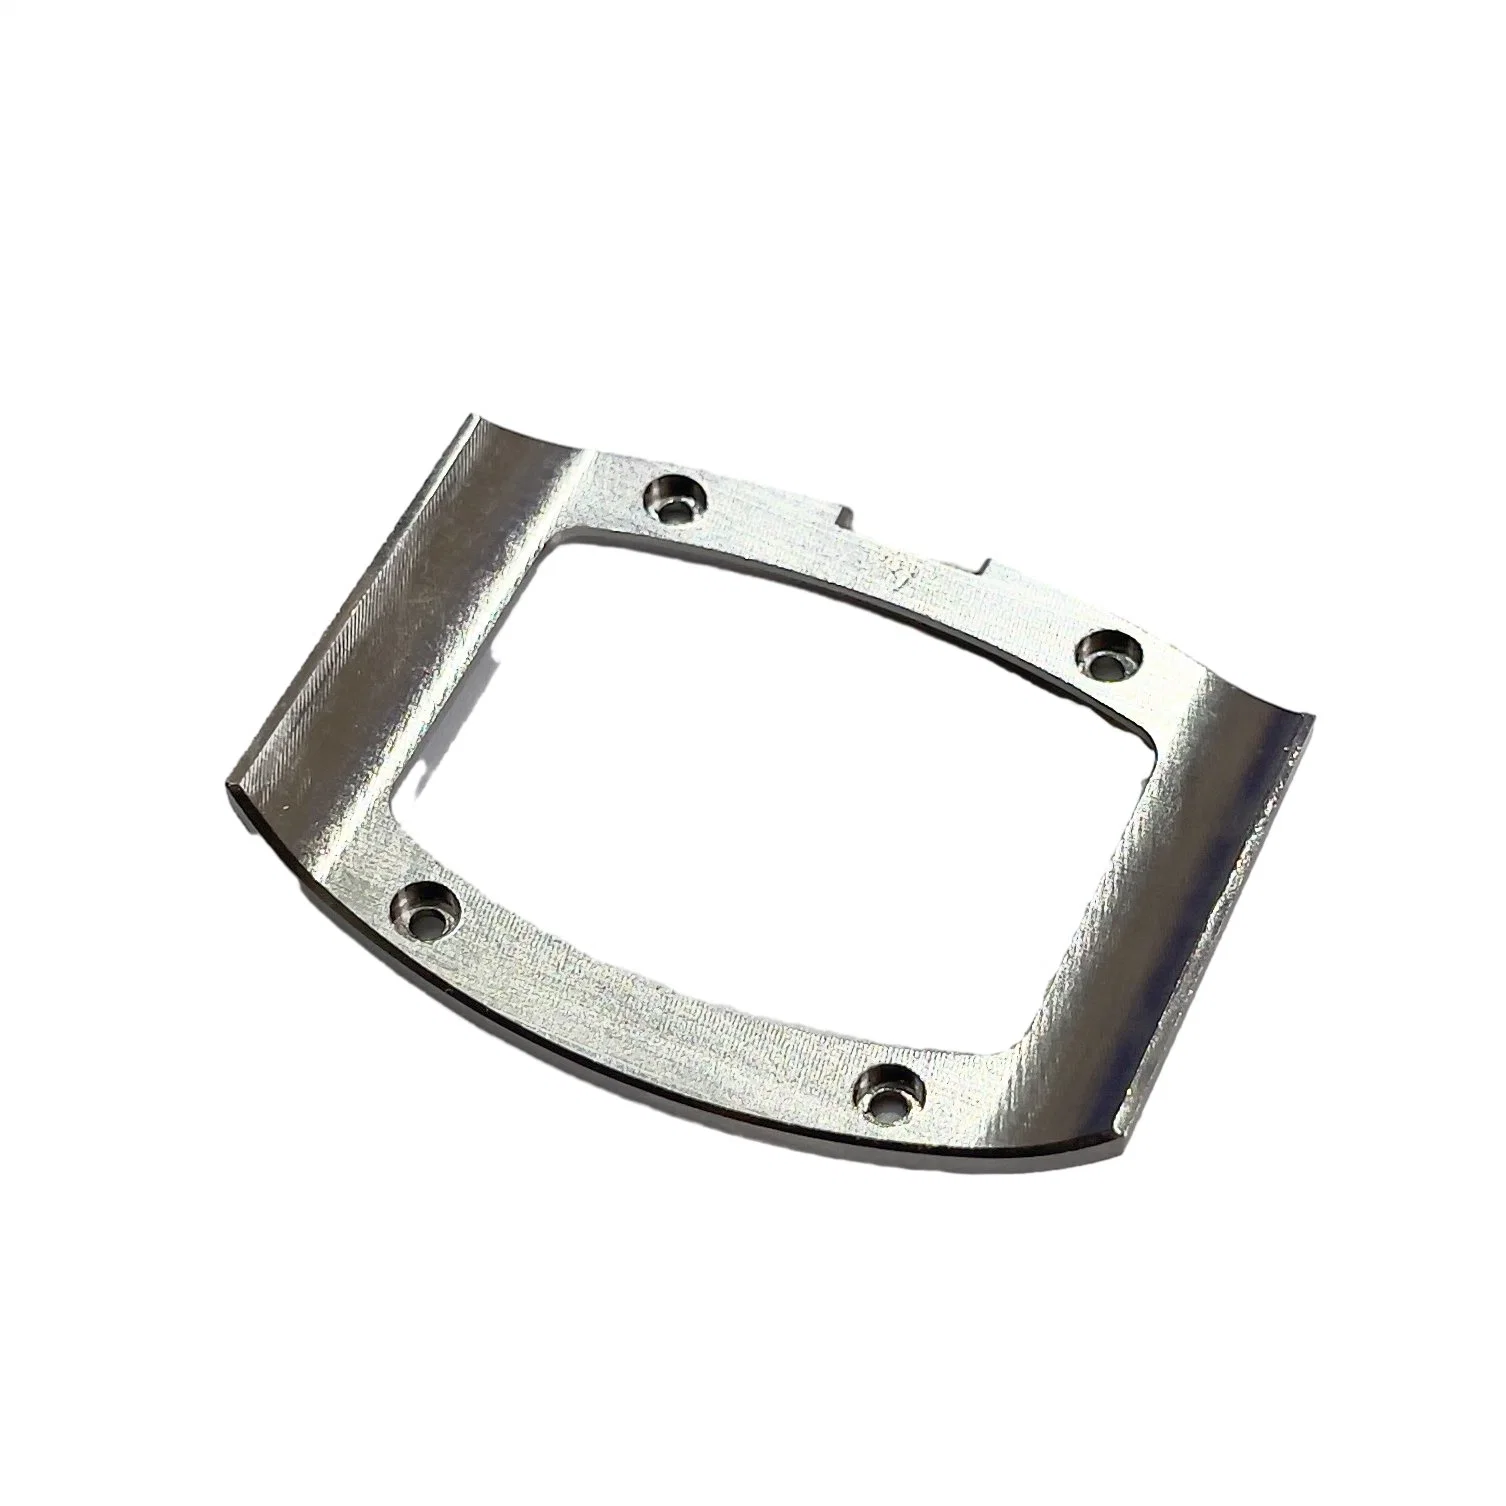 Custimized CNC Machined Stainless Steel/Titanium Watch Case Watch Parts